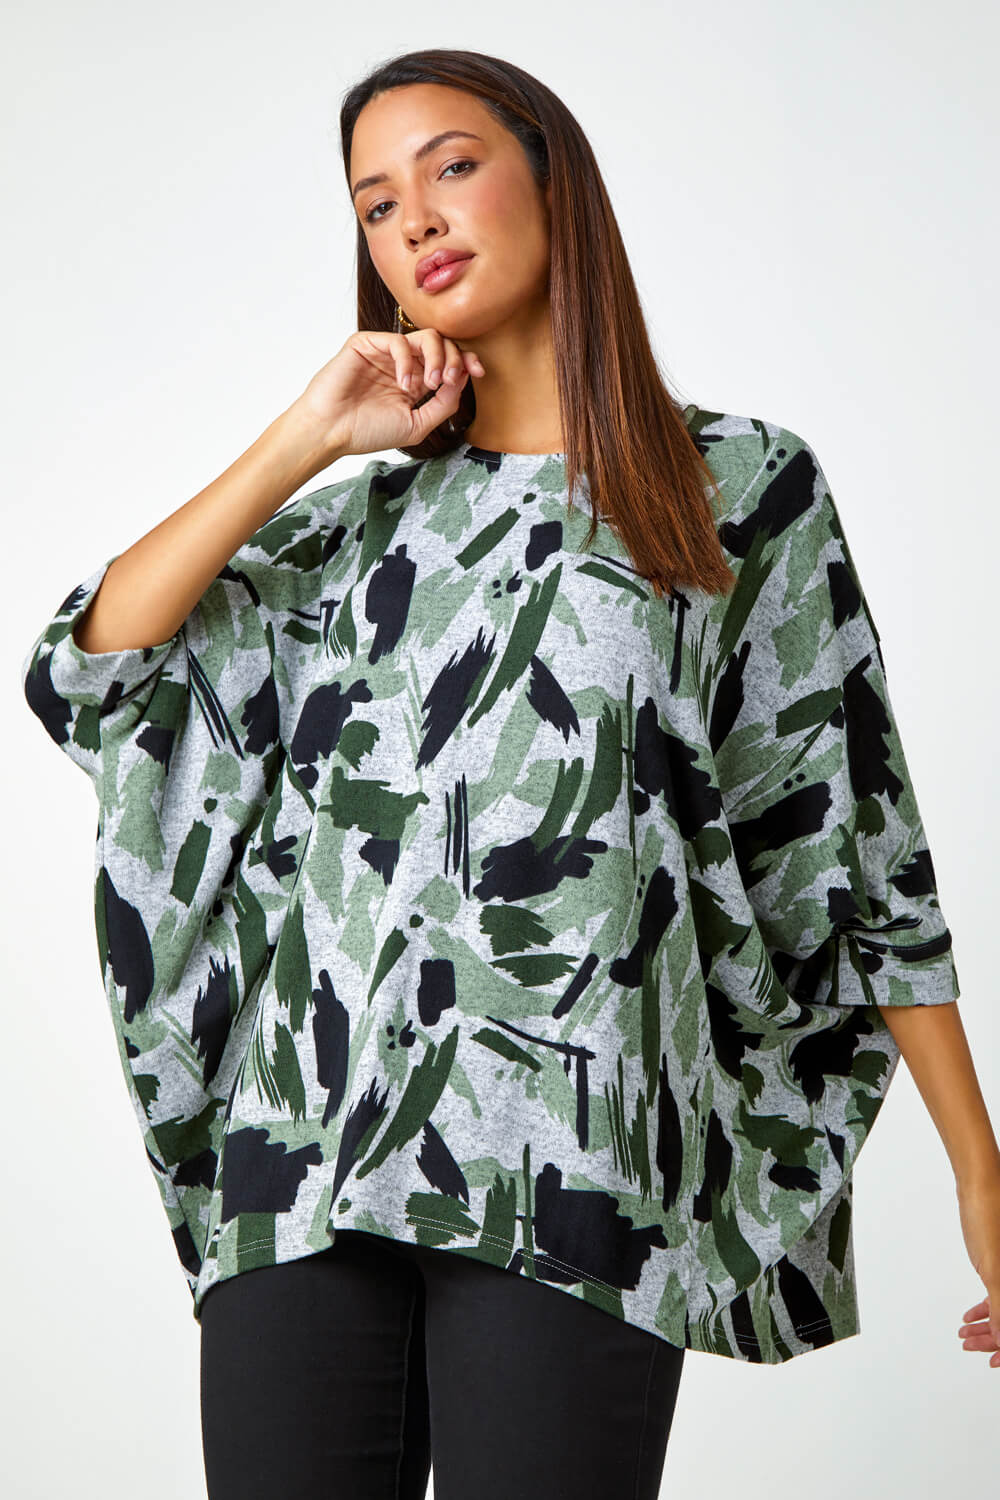 KHAKI Relaxed Abstract Print Stretch Top , Image 2 of 5